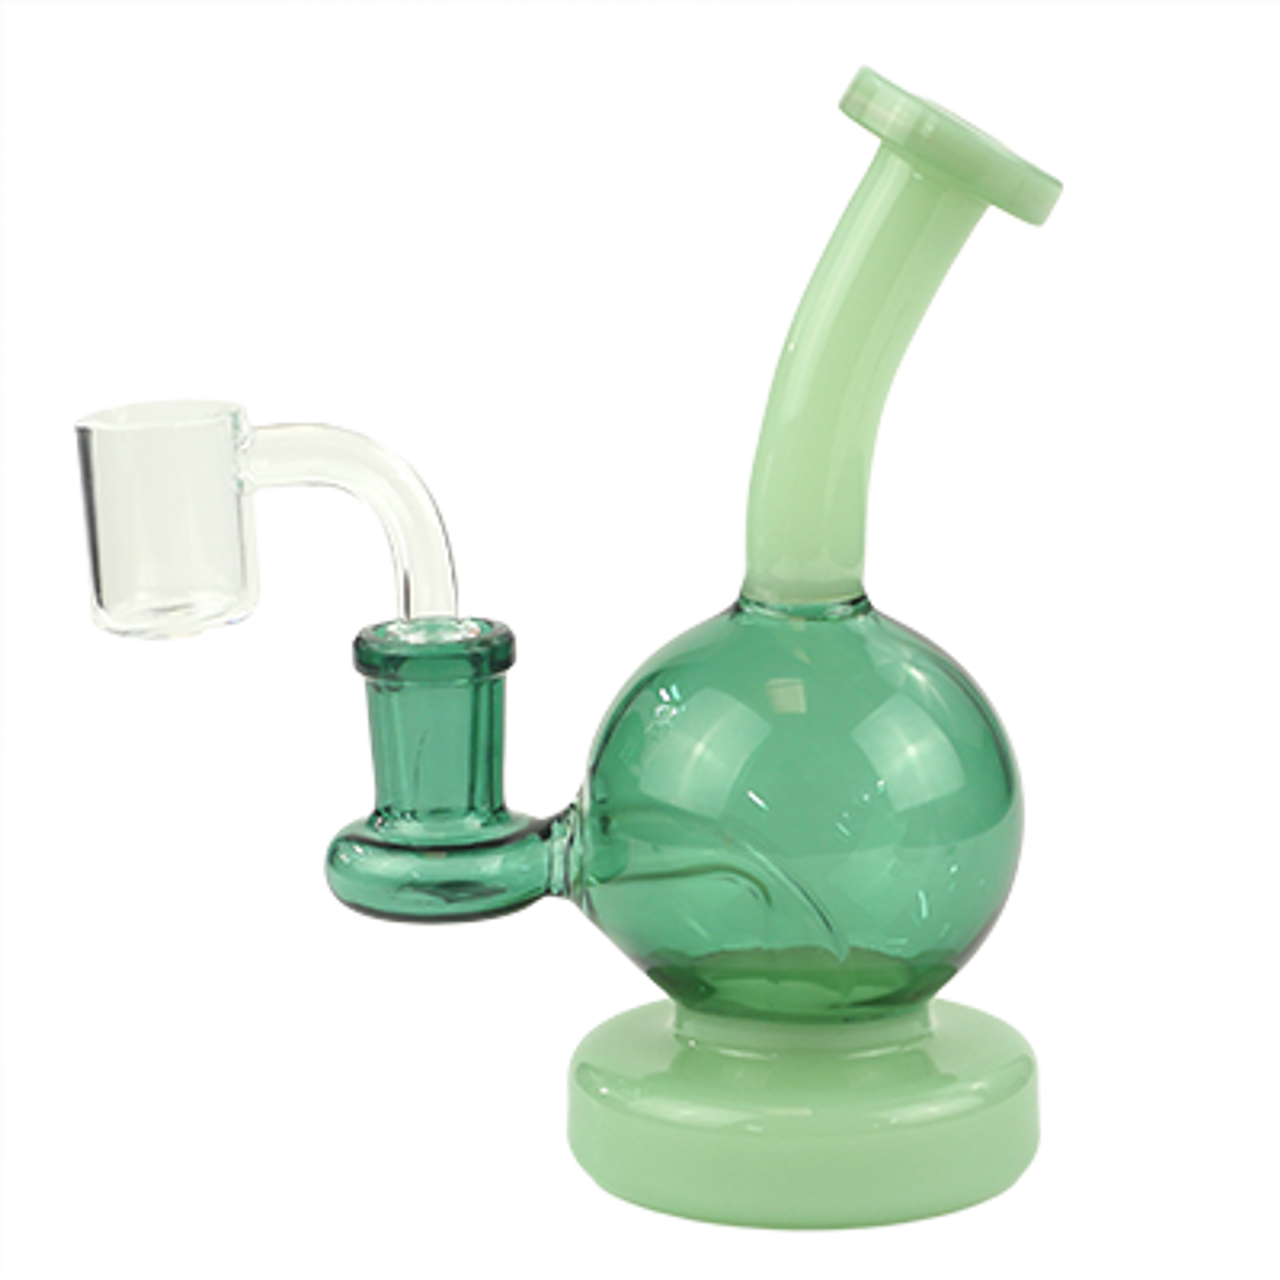 5" SirEEL Duality Sphere Mini Rig with Banger | Assorted Colors